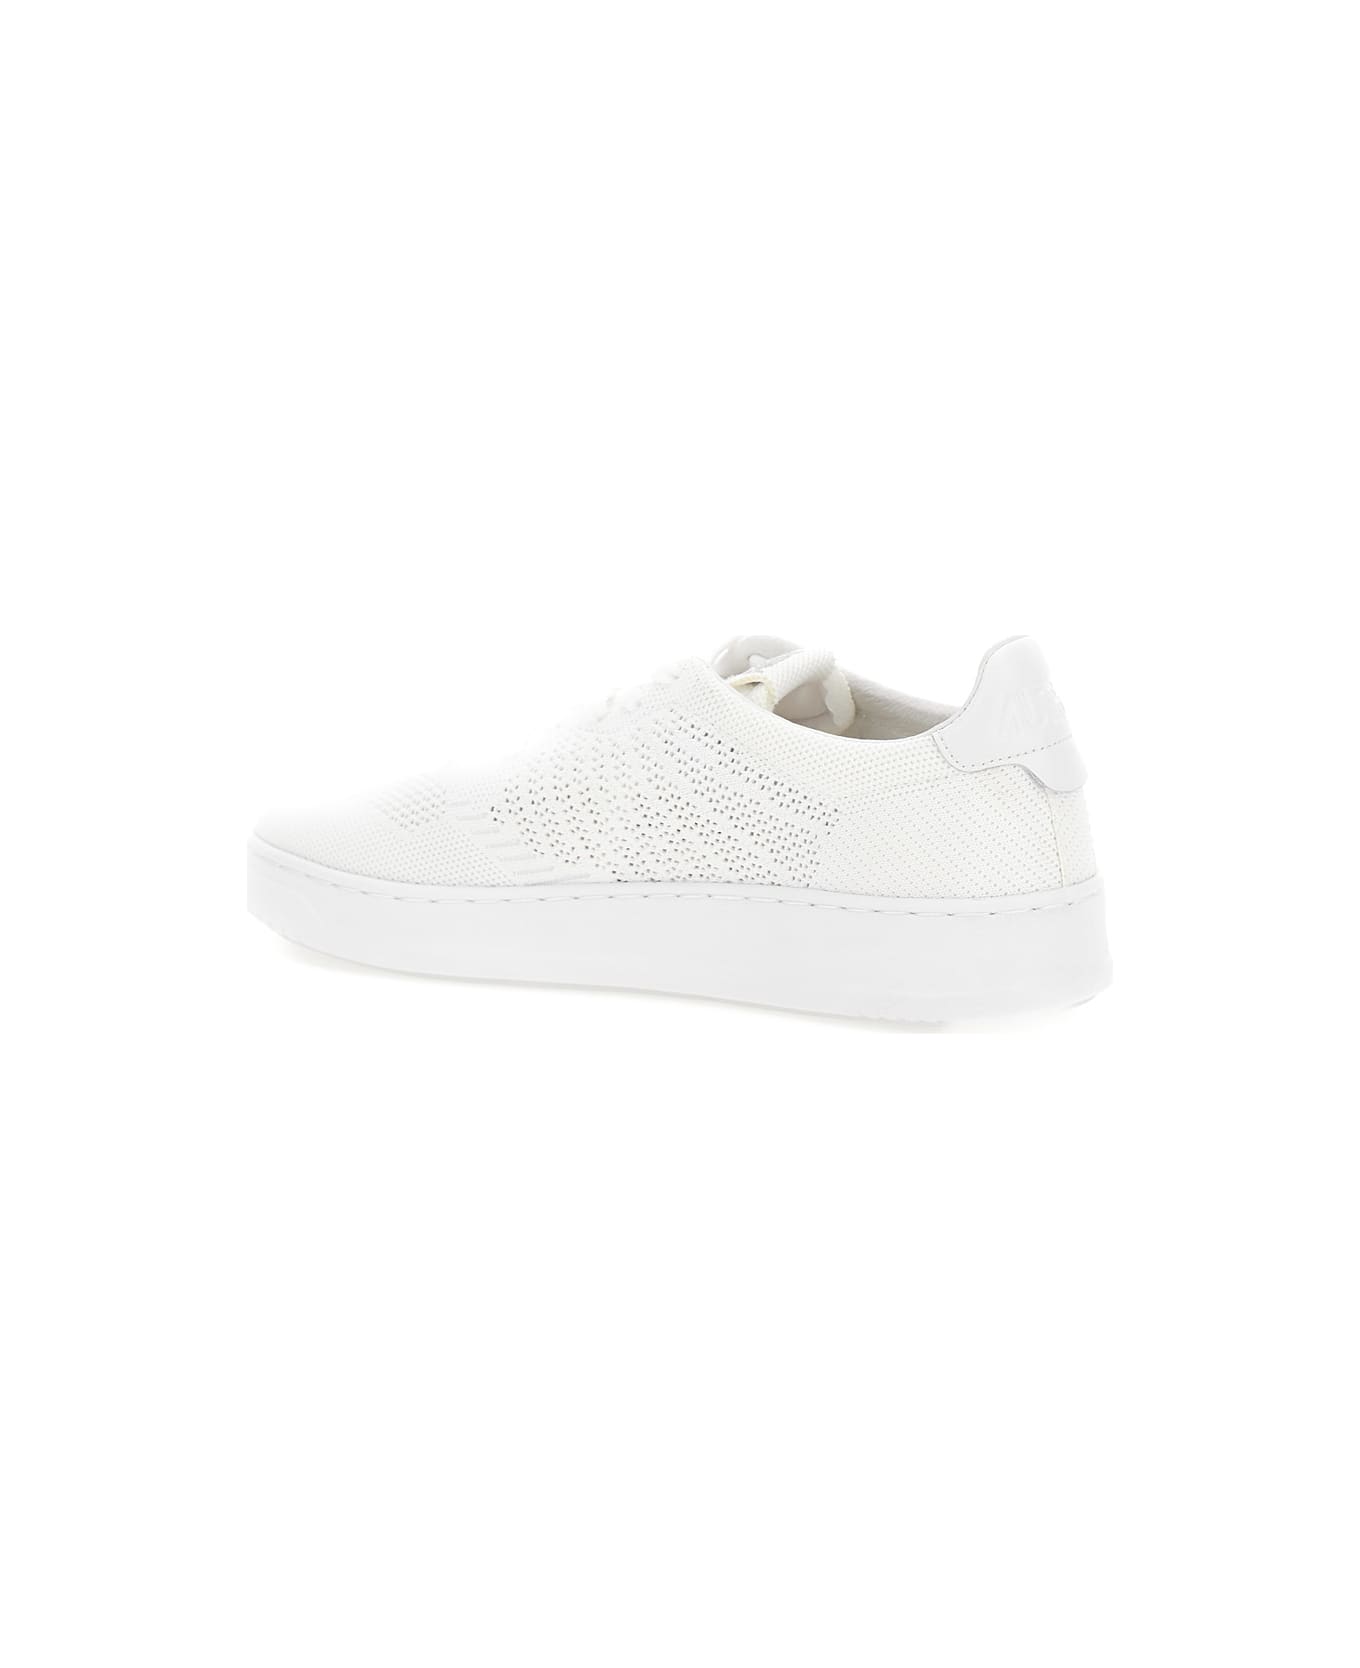 Autry 'medalist Easeknit' White Low Top Sneakers With Perforated Design In Knit Man - White スニーカー